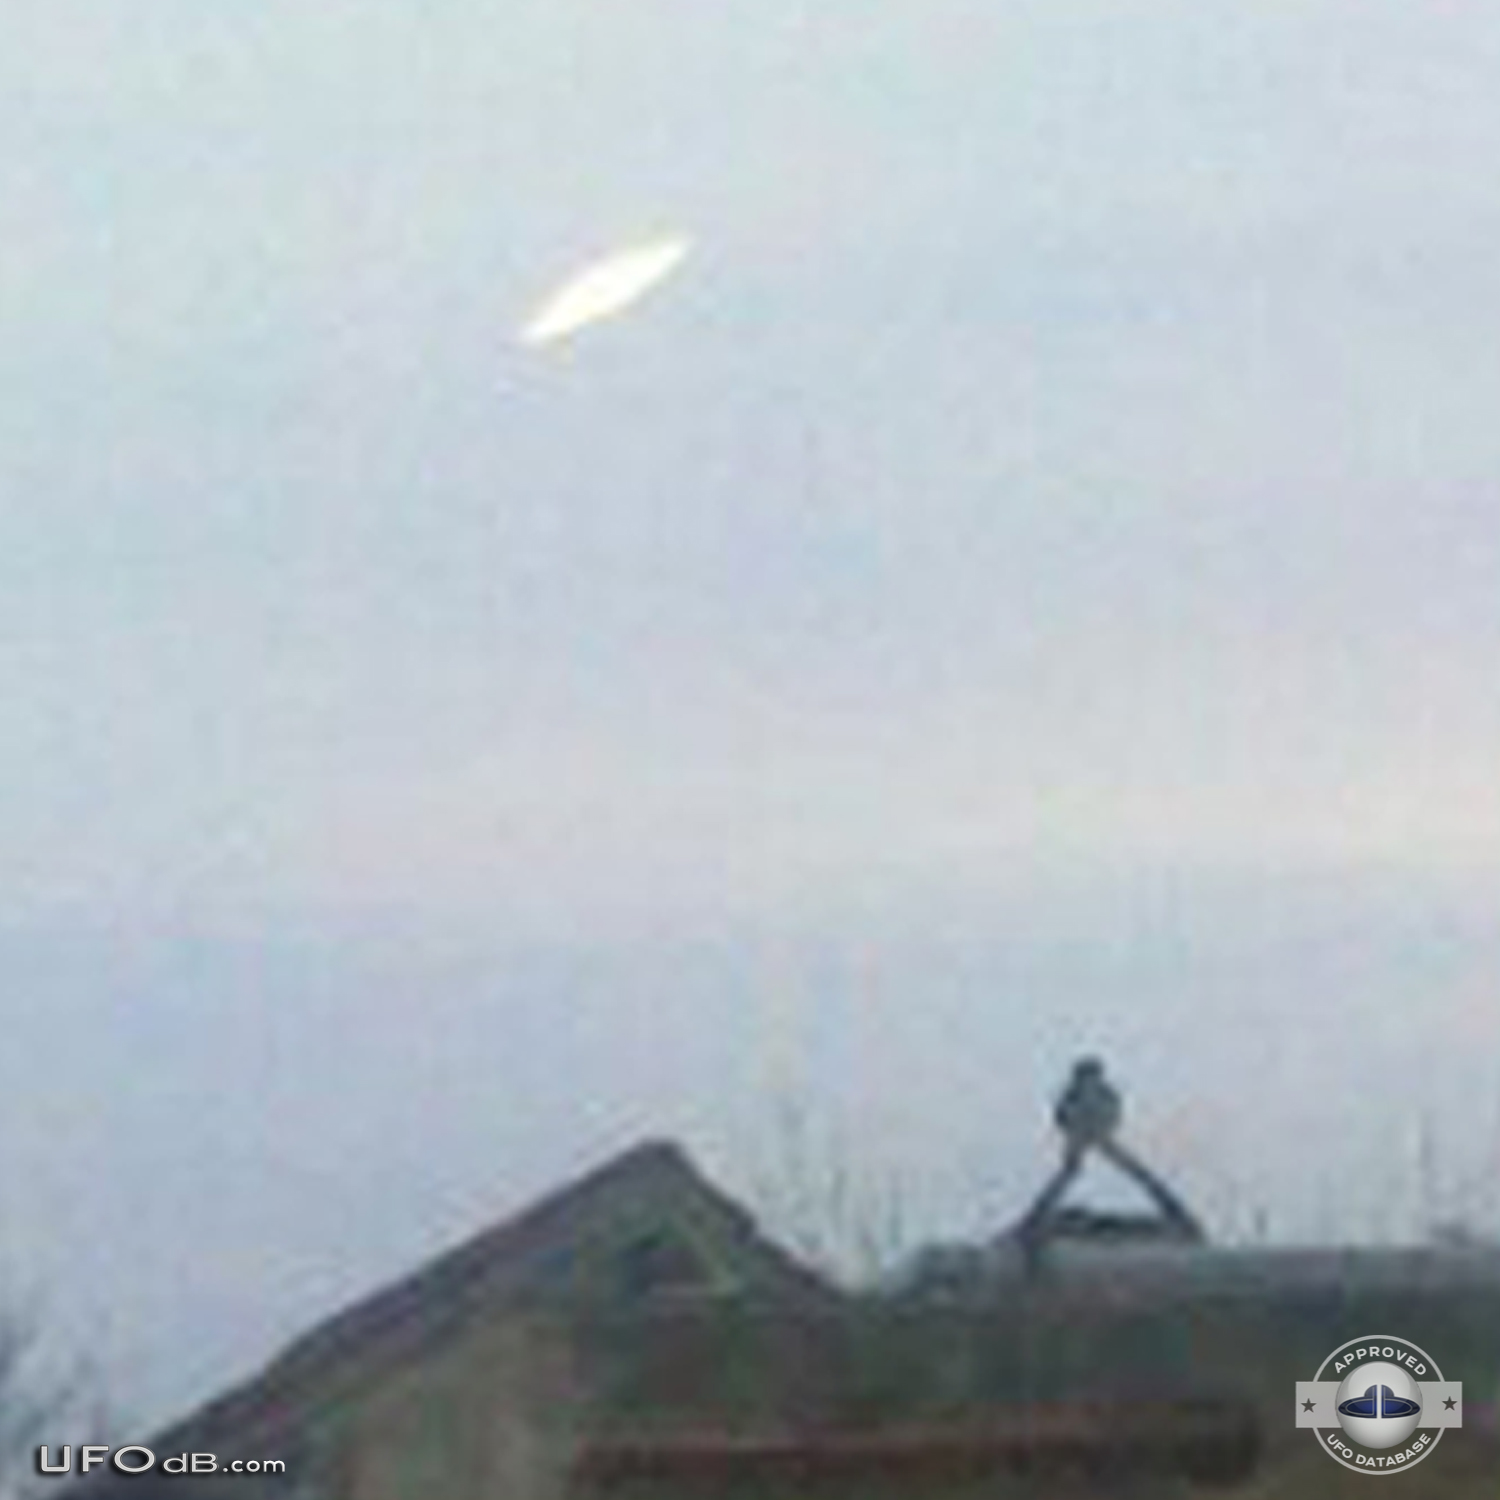 White Saucer UFO caught on photo in Bahia Blanca, Buenos Aires - 2012 UFO Picture #522-4